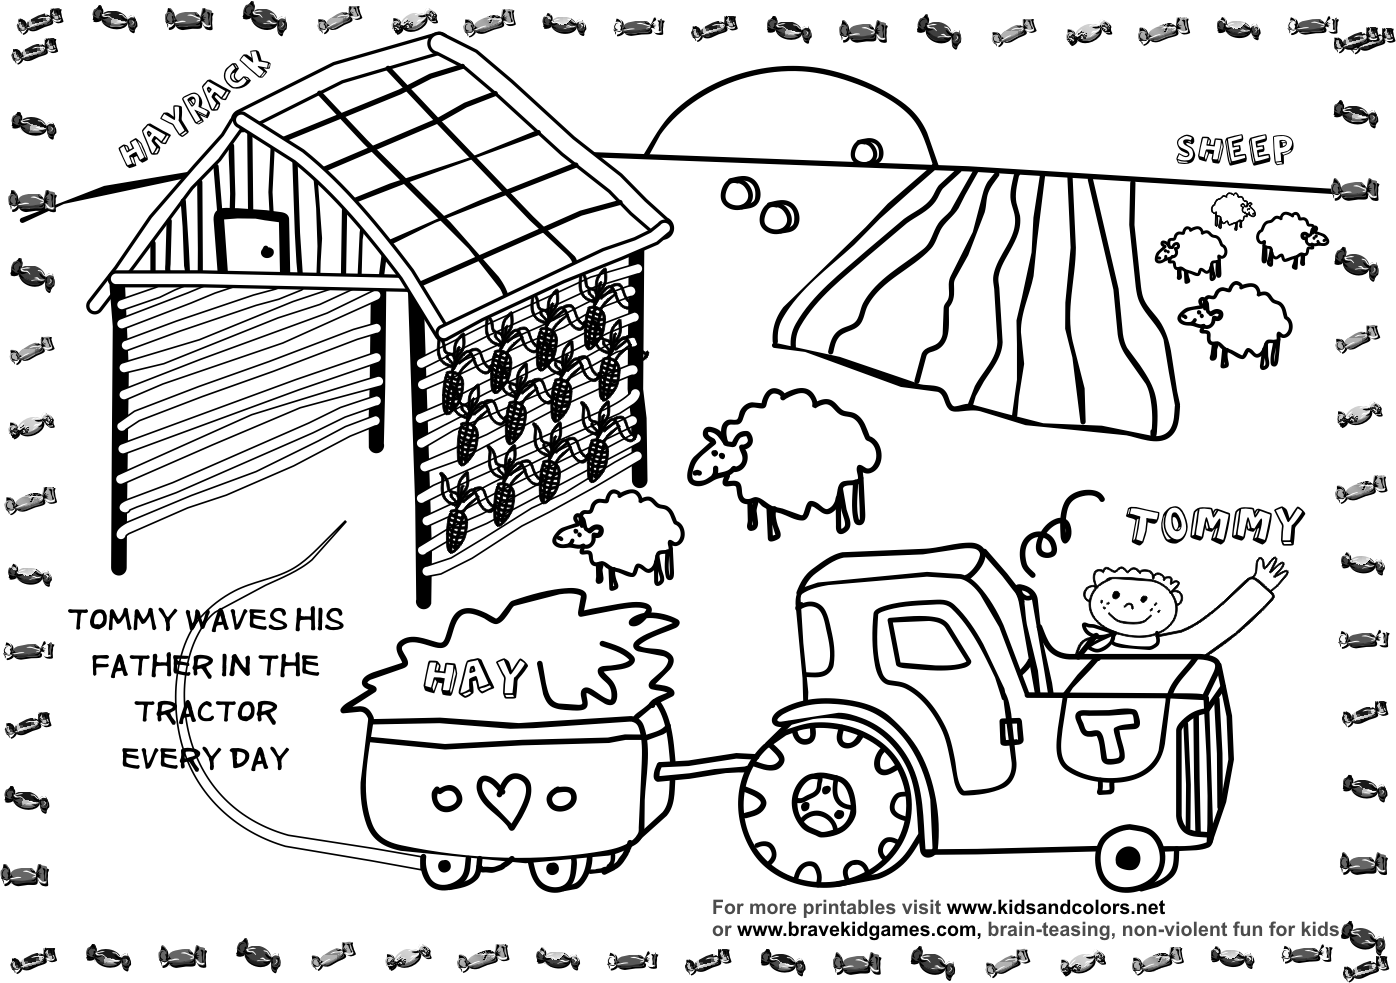 Download Free Printable Farm Coloring Pages - Coloring Home